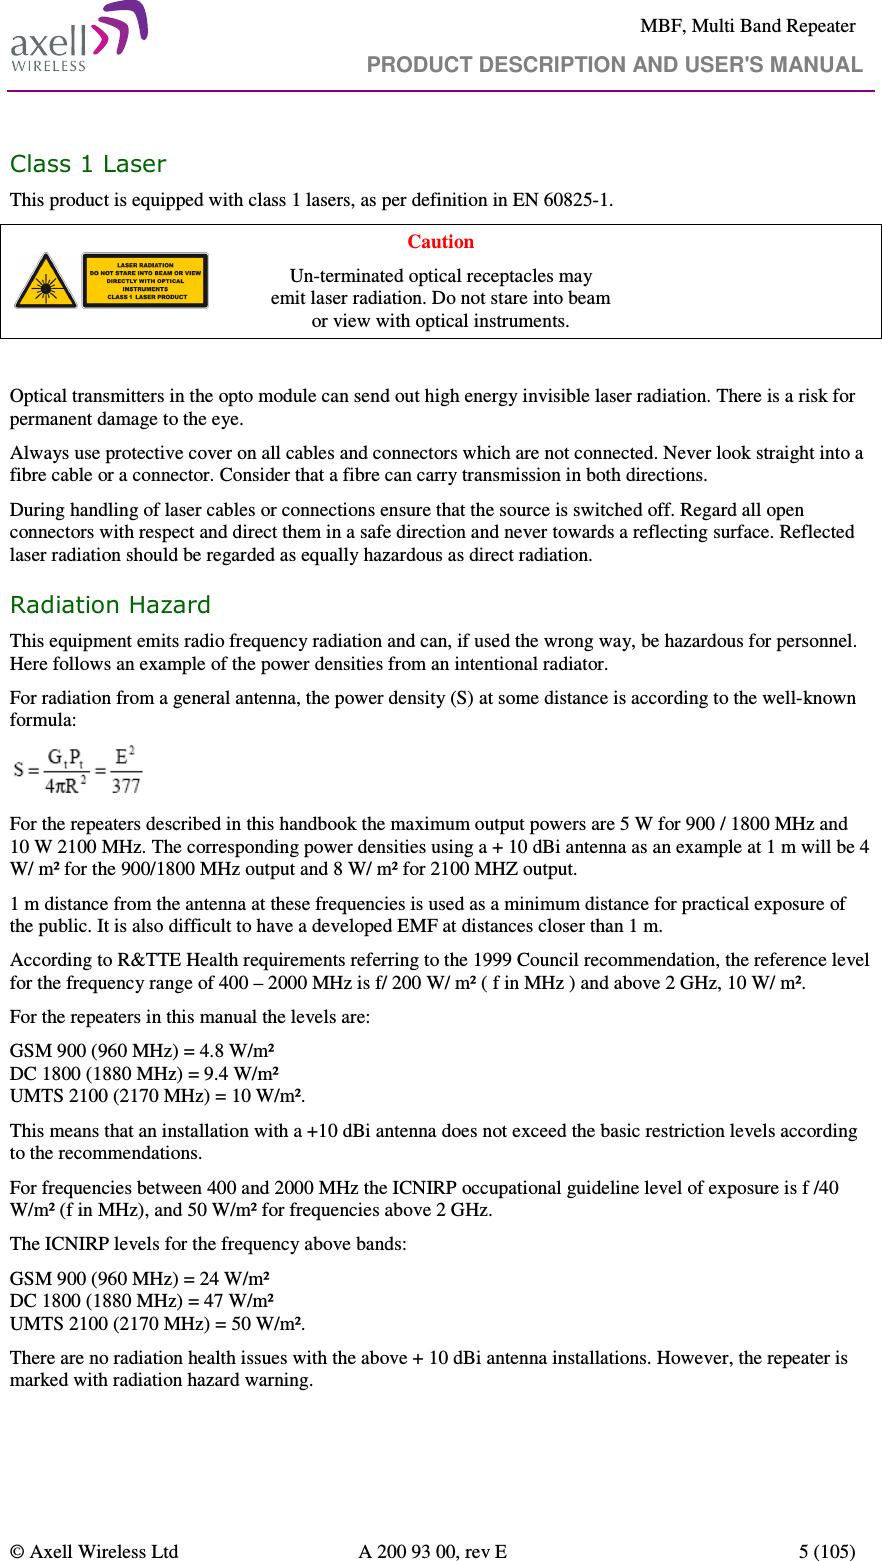     MBF, Multi Band Repeater                                     PRODUCT DESCRIPTION AND USER&apos;S MANUAL   © Axell Wireless Ltd  A 200 93 00, rev E  5 (105)  Class 1 Laser This product is equipped with class 1 lasers, as per definition in EN 60825-1.  Caution Un-terminated optical receptacles may  emit laser radiation. Do not stare into beam  or view with optical instruments.  Optical transmitters in the opto module can send out high energy invisible laser radiation. There is a risk for permanent damage to the eye.   Always use protective cover on all cables and connectors which are not connected. Never look straight into a fibre cable or a connector. Consider that a fibre can carry transmission in both directions.  During handling of laser cables or connections ensure that the source is switched off. Regard all open connectors with respect and direct them in a safe direction and never towards a reflecting surface. Reflected laser radiation should be regarded as equally hazardous as direct radiation. Radiation Hazard  This equipment emits radio frequency radiation and can, if used the wrong way, be hazardous for personnel. Here follows an example of the power densities from an intentional radiator.  For radiation from a general antenna, the power density (S) at some distance is according to the well-known formula:  For the repeaters described in this handbook the maximum output powers are 5 W for 900 / 1800 MHz and 10 W 2100 MHz. The corresponding power densities using a + 10 dBi antenna as an example at 1 m will be 4 W/ m² for the 900/1800 MHz output and 8 W/ m² for 2100 MHZ output. 1 m distance from the antenna at these frequencies is used as a minimum distance for practical exposure of the public. It is also difficult to have a developed EMF at distances closer than 1 m.  According to R&amp;TTE Health requirements referring to the 1999 Council recommendation, the reference level for the frequency range of 400 – 2000 MHz is f/ 200 W/ m² ( f in MHz ) and above 2 GHz, 10 W/ m².  For the repeaters in this manual the levels are: GSM 900 (960 MHz) = 4.8 W/m² DC 1800 (1880 MHz) = 9.4 W/m² UMTS 2100 (2170 MHz) = 10 W/m². This means that an installation with a +10 dBi antenna does not exceed the basic restriction levels according to the recommendations. For frequencies between 400 and 2000 MHz the ICNIRP occupational guideline level of exposure is f /40 W/m² (f in MHz), and 50 W/m² for frequencies above 2 GHz. The ICNIRP levels for the frequency above bands: GSM 900 (960 MHz) = 24 W/m² DC 1800 (1880 MHz) = 47 W/m² UMTS 2100 (2170 MHz) = 50 W/m². There are no radiation health issues with the above + 10 dBi antenna installations. However, the repeater is marked with radiation hazard warning. 